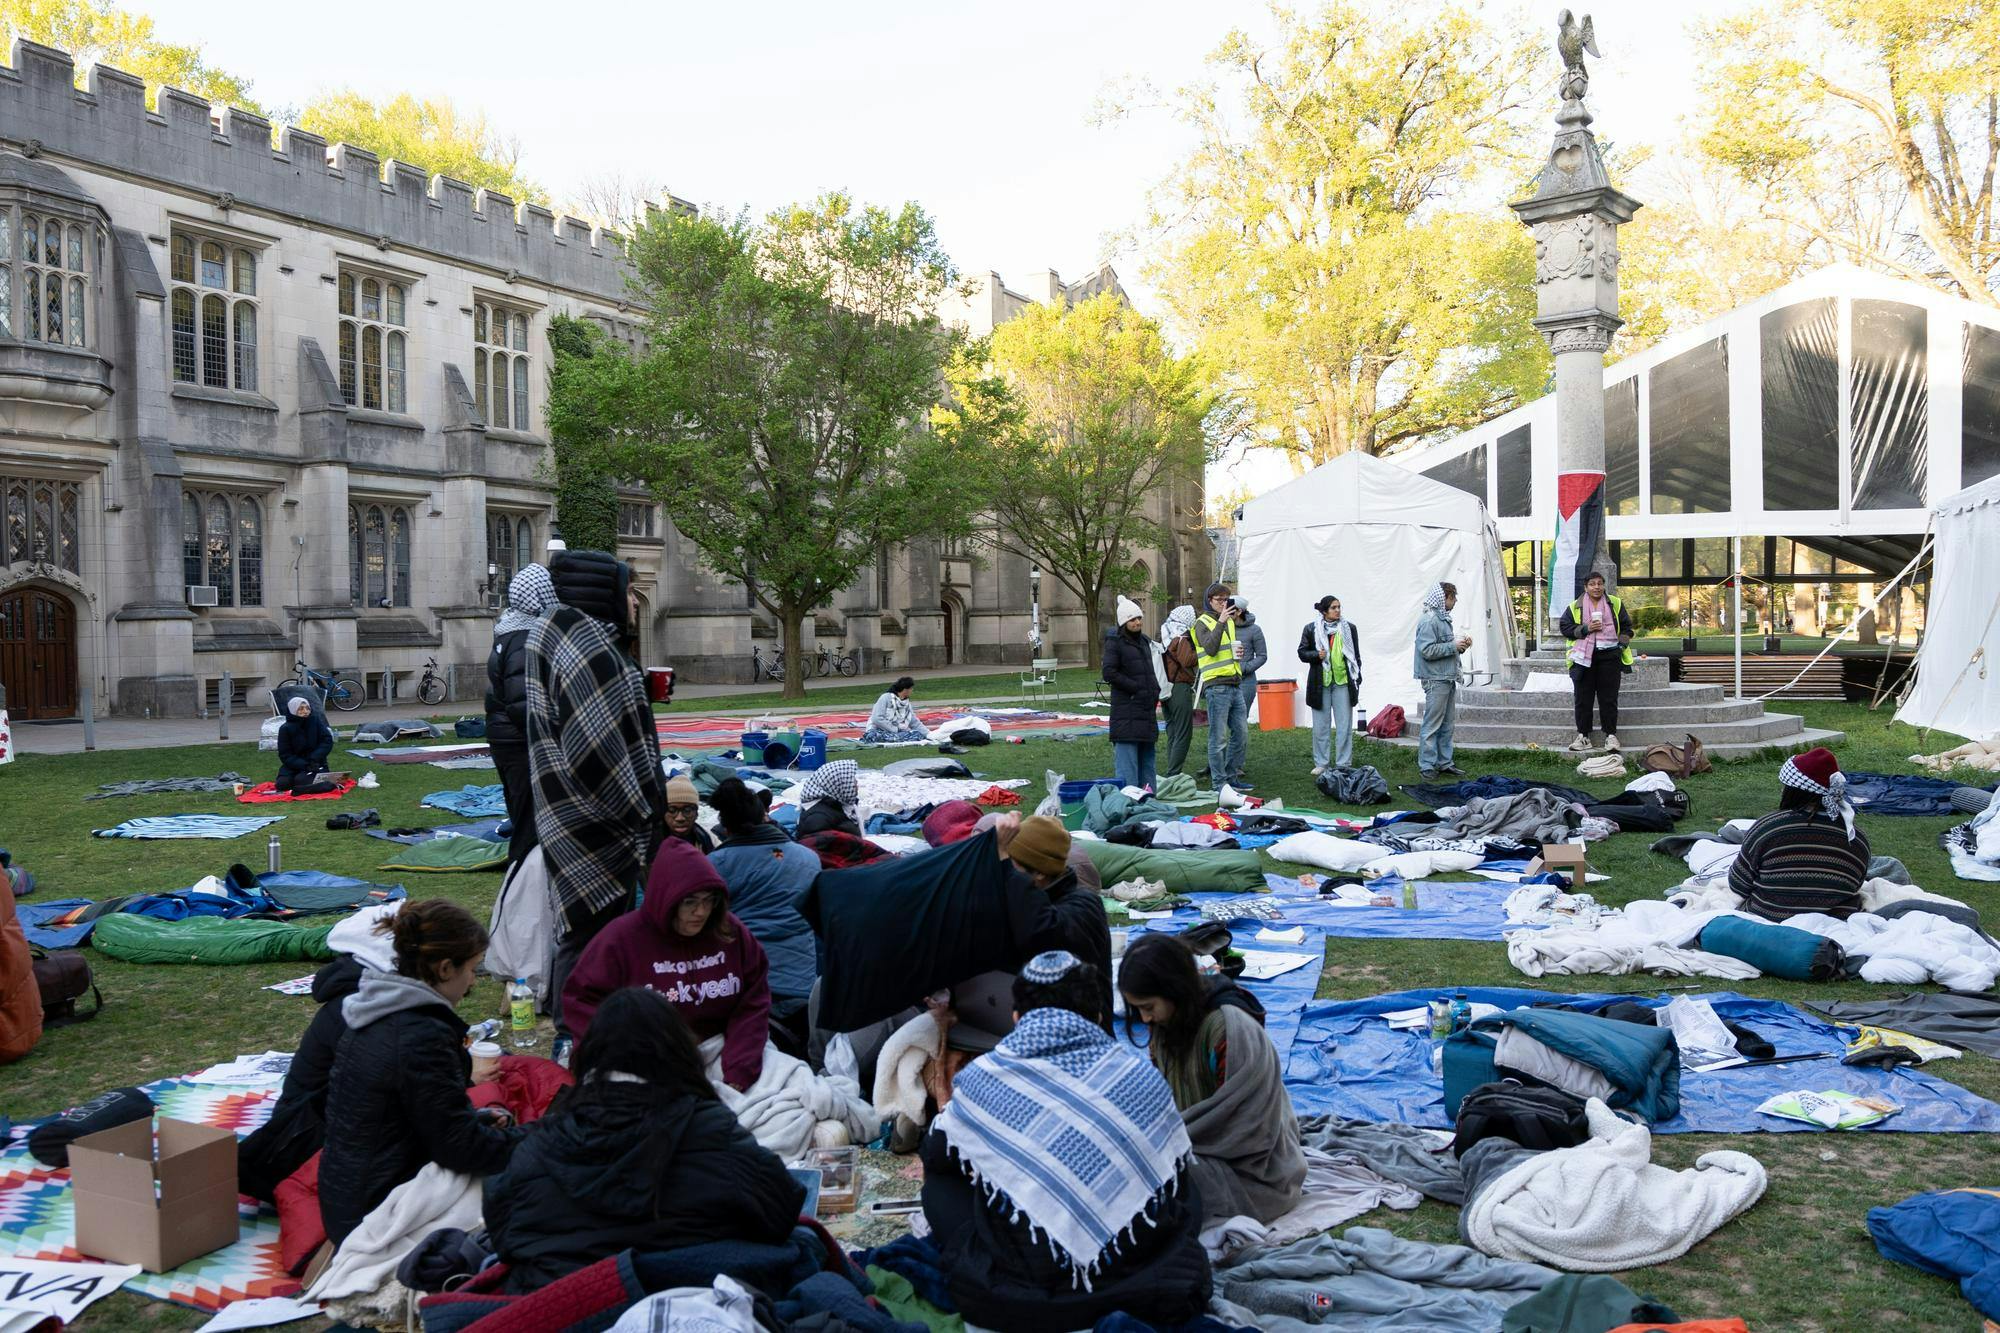 Student protestors sit on a lawn in the early morning with blankets strewn around them.